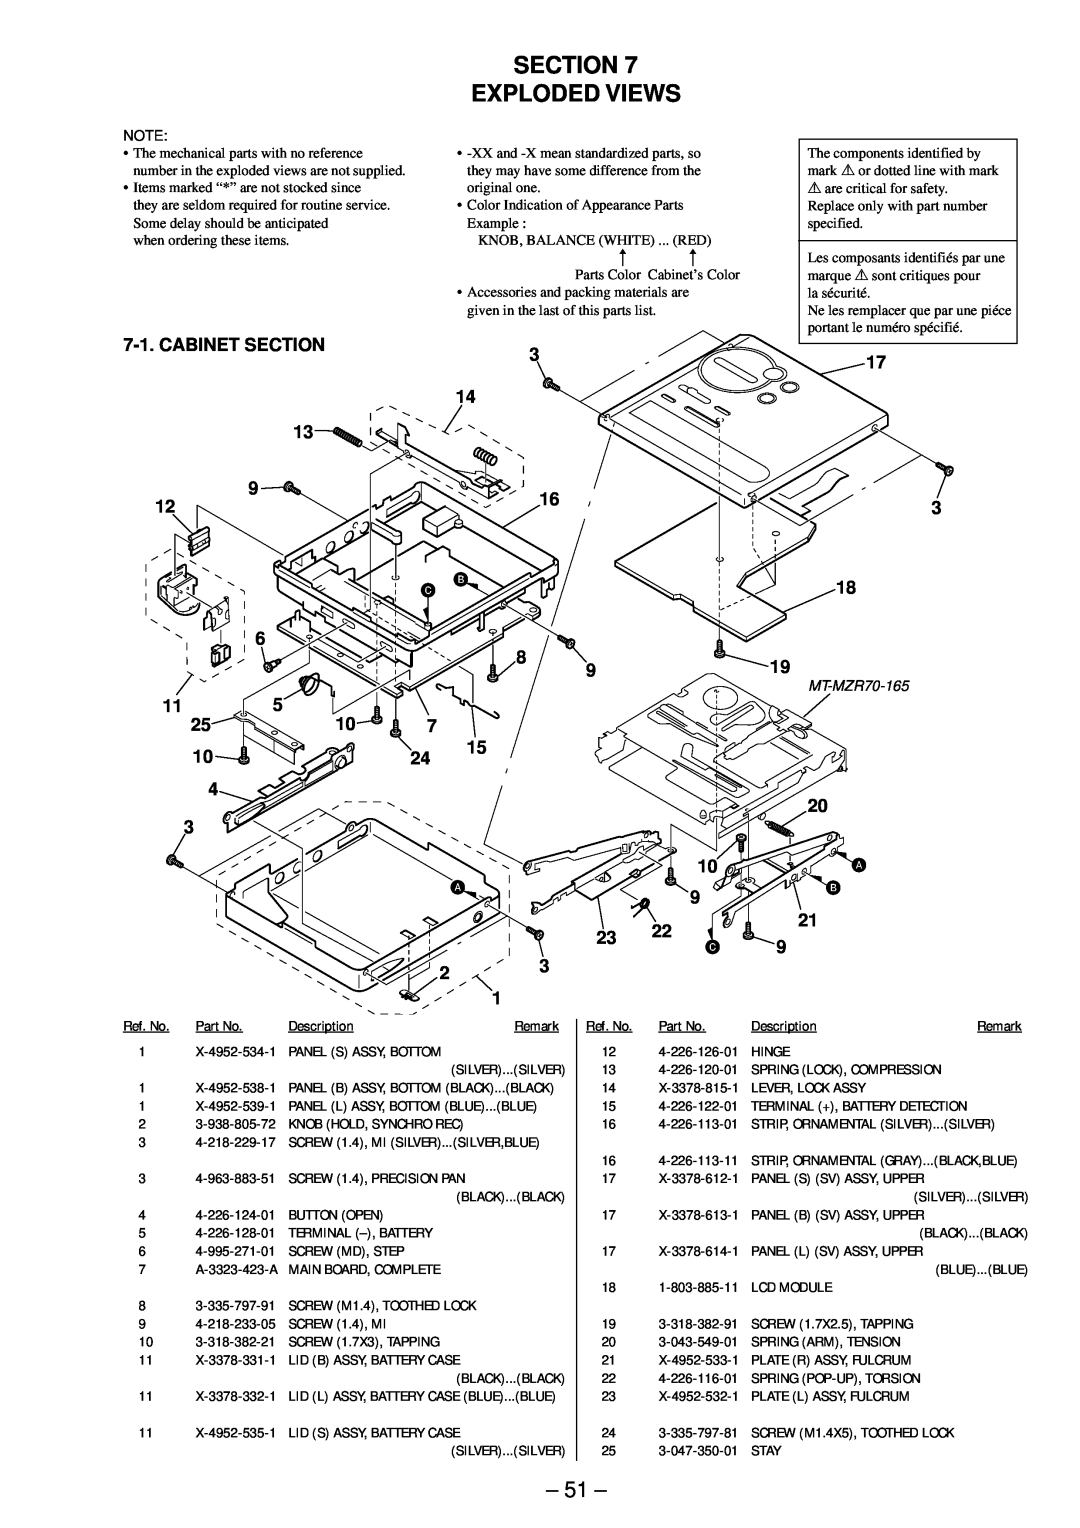 Sony MT-MZR70-165, MZ-R90/R91 service manual Section Exploded Views 